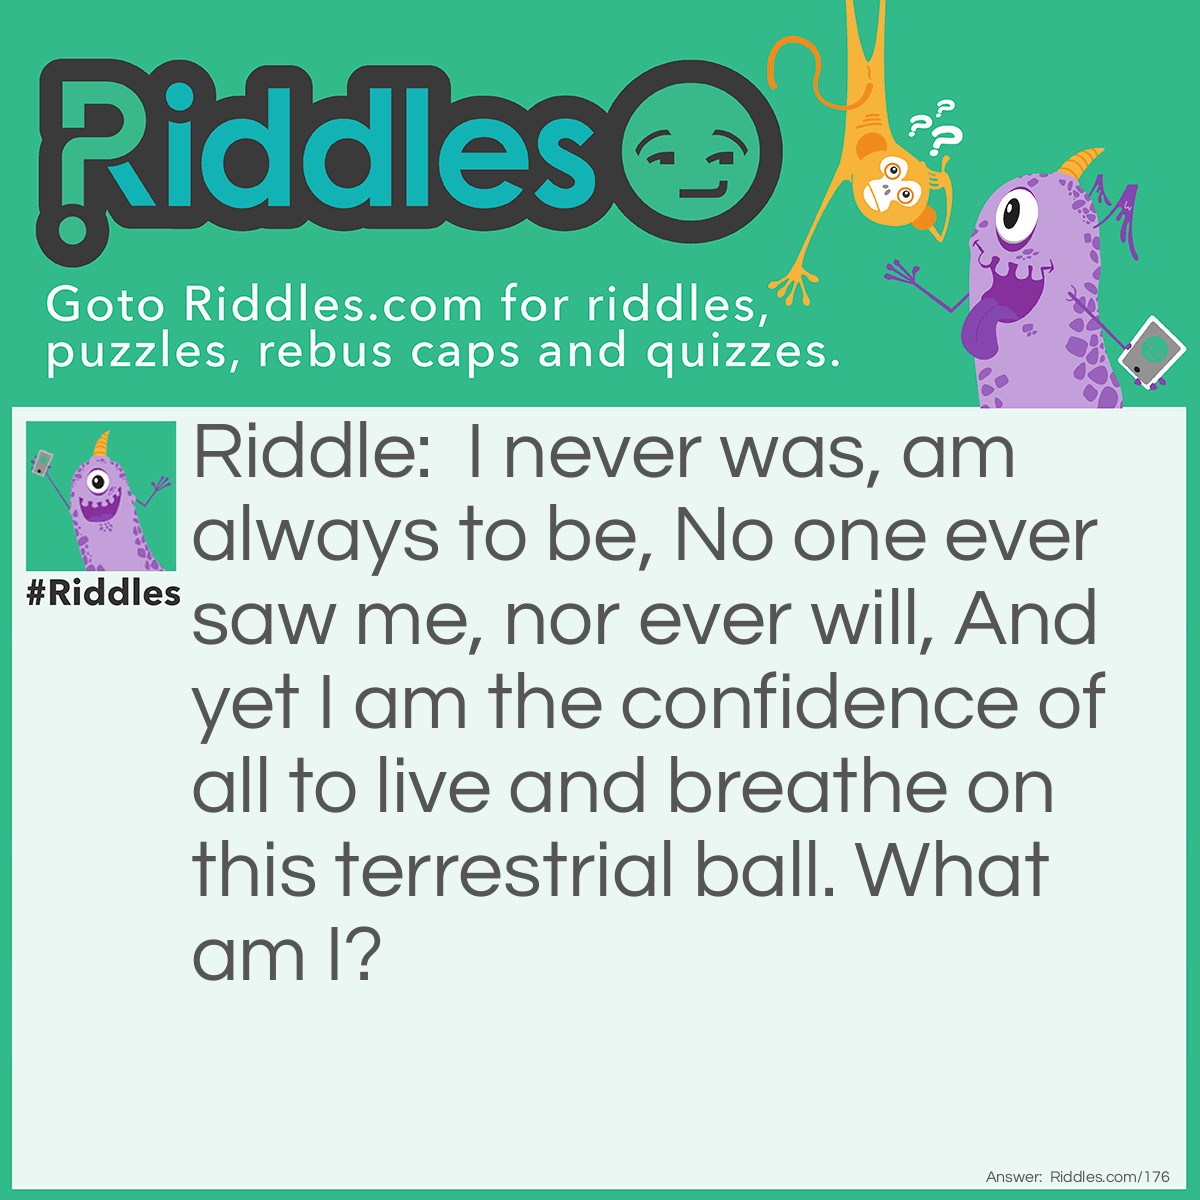 Riddle: I never was, am always to be, No one ever saw me, nor ever will, And yet I am the confidence of all to live and breathe on this terrestrial ball. <a href="/what-am-i-riddles">What am I</a>? Answer: Tomorrow.